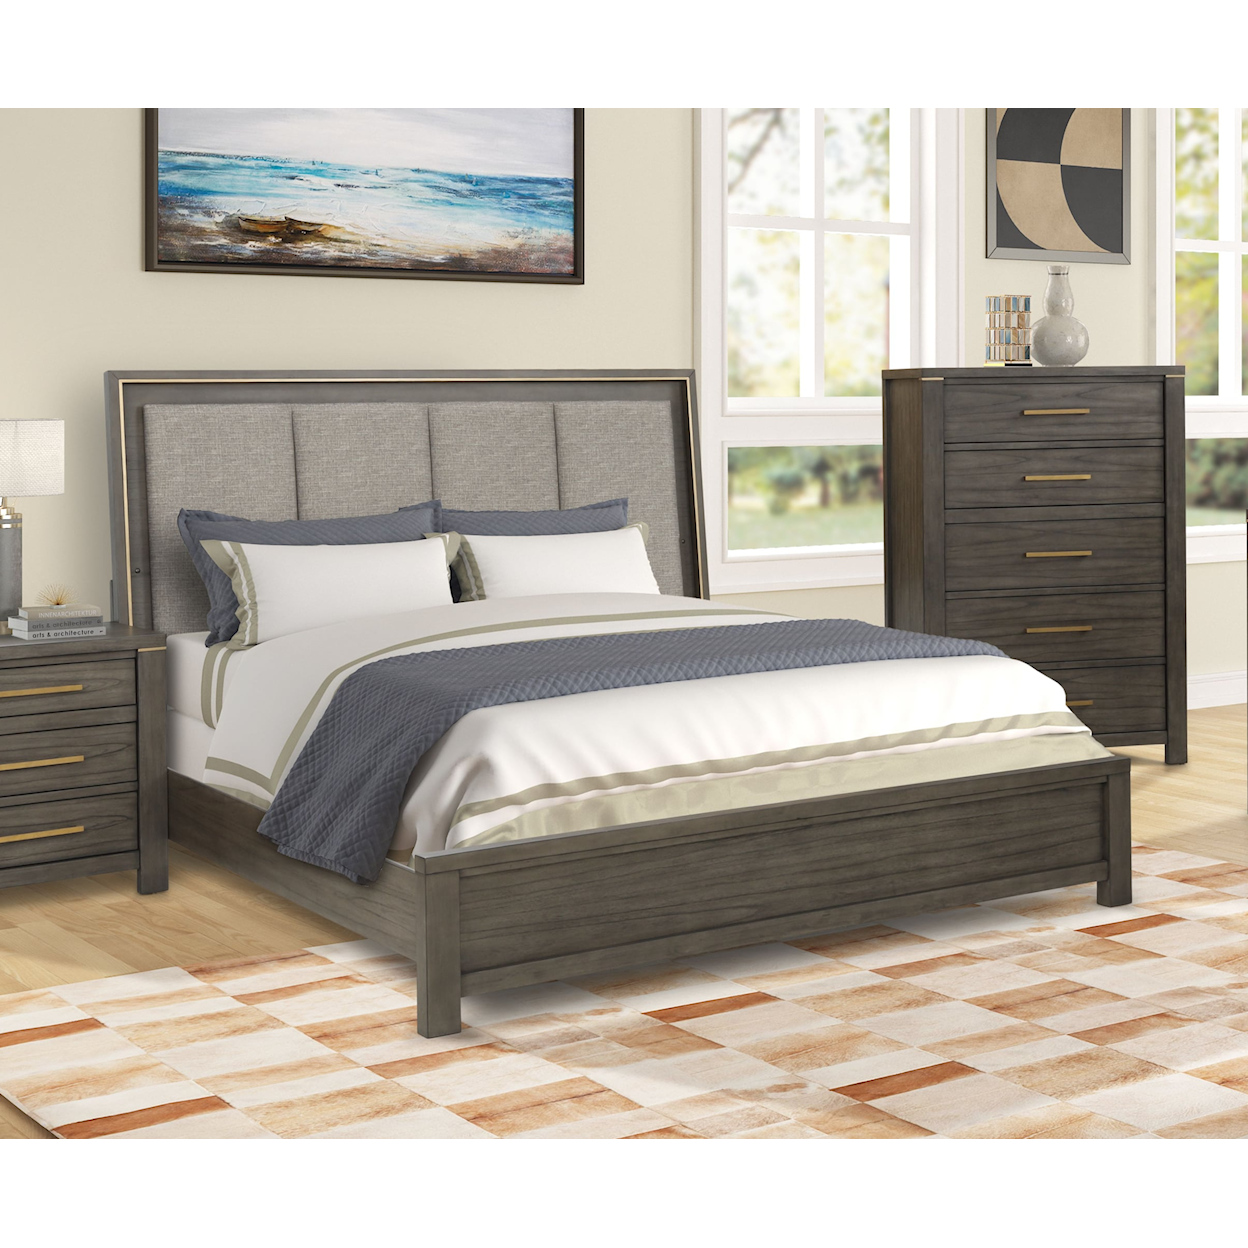 Lifestyle 8481A Upholstered Panel Bed - King